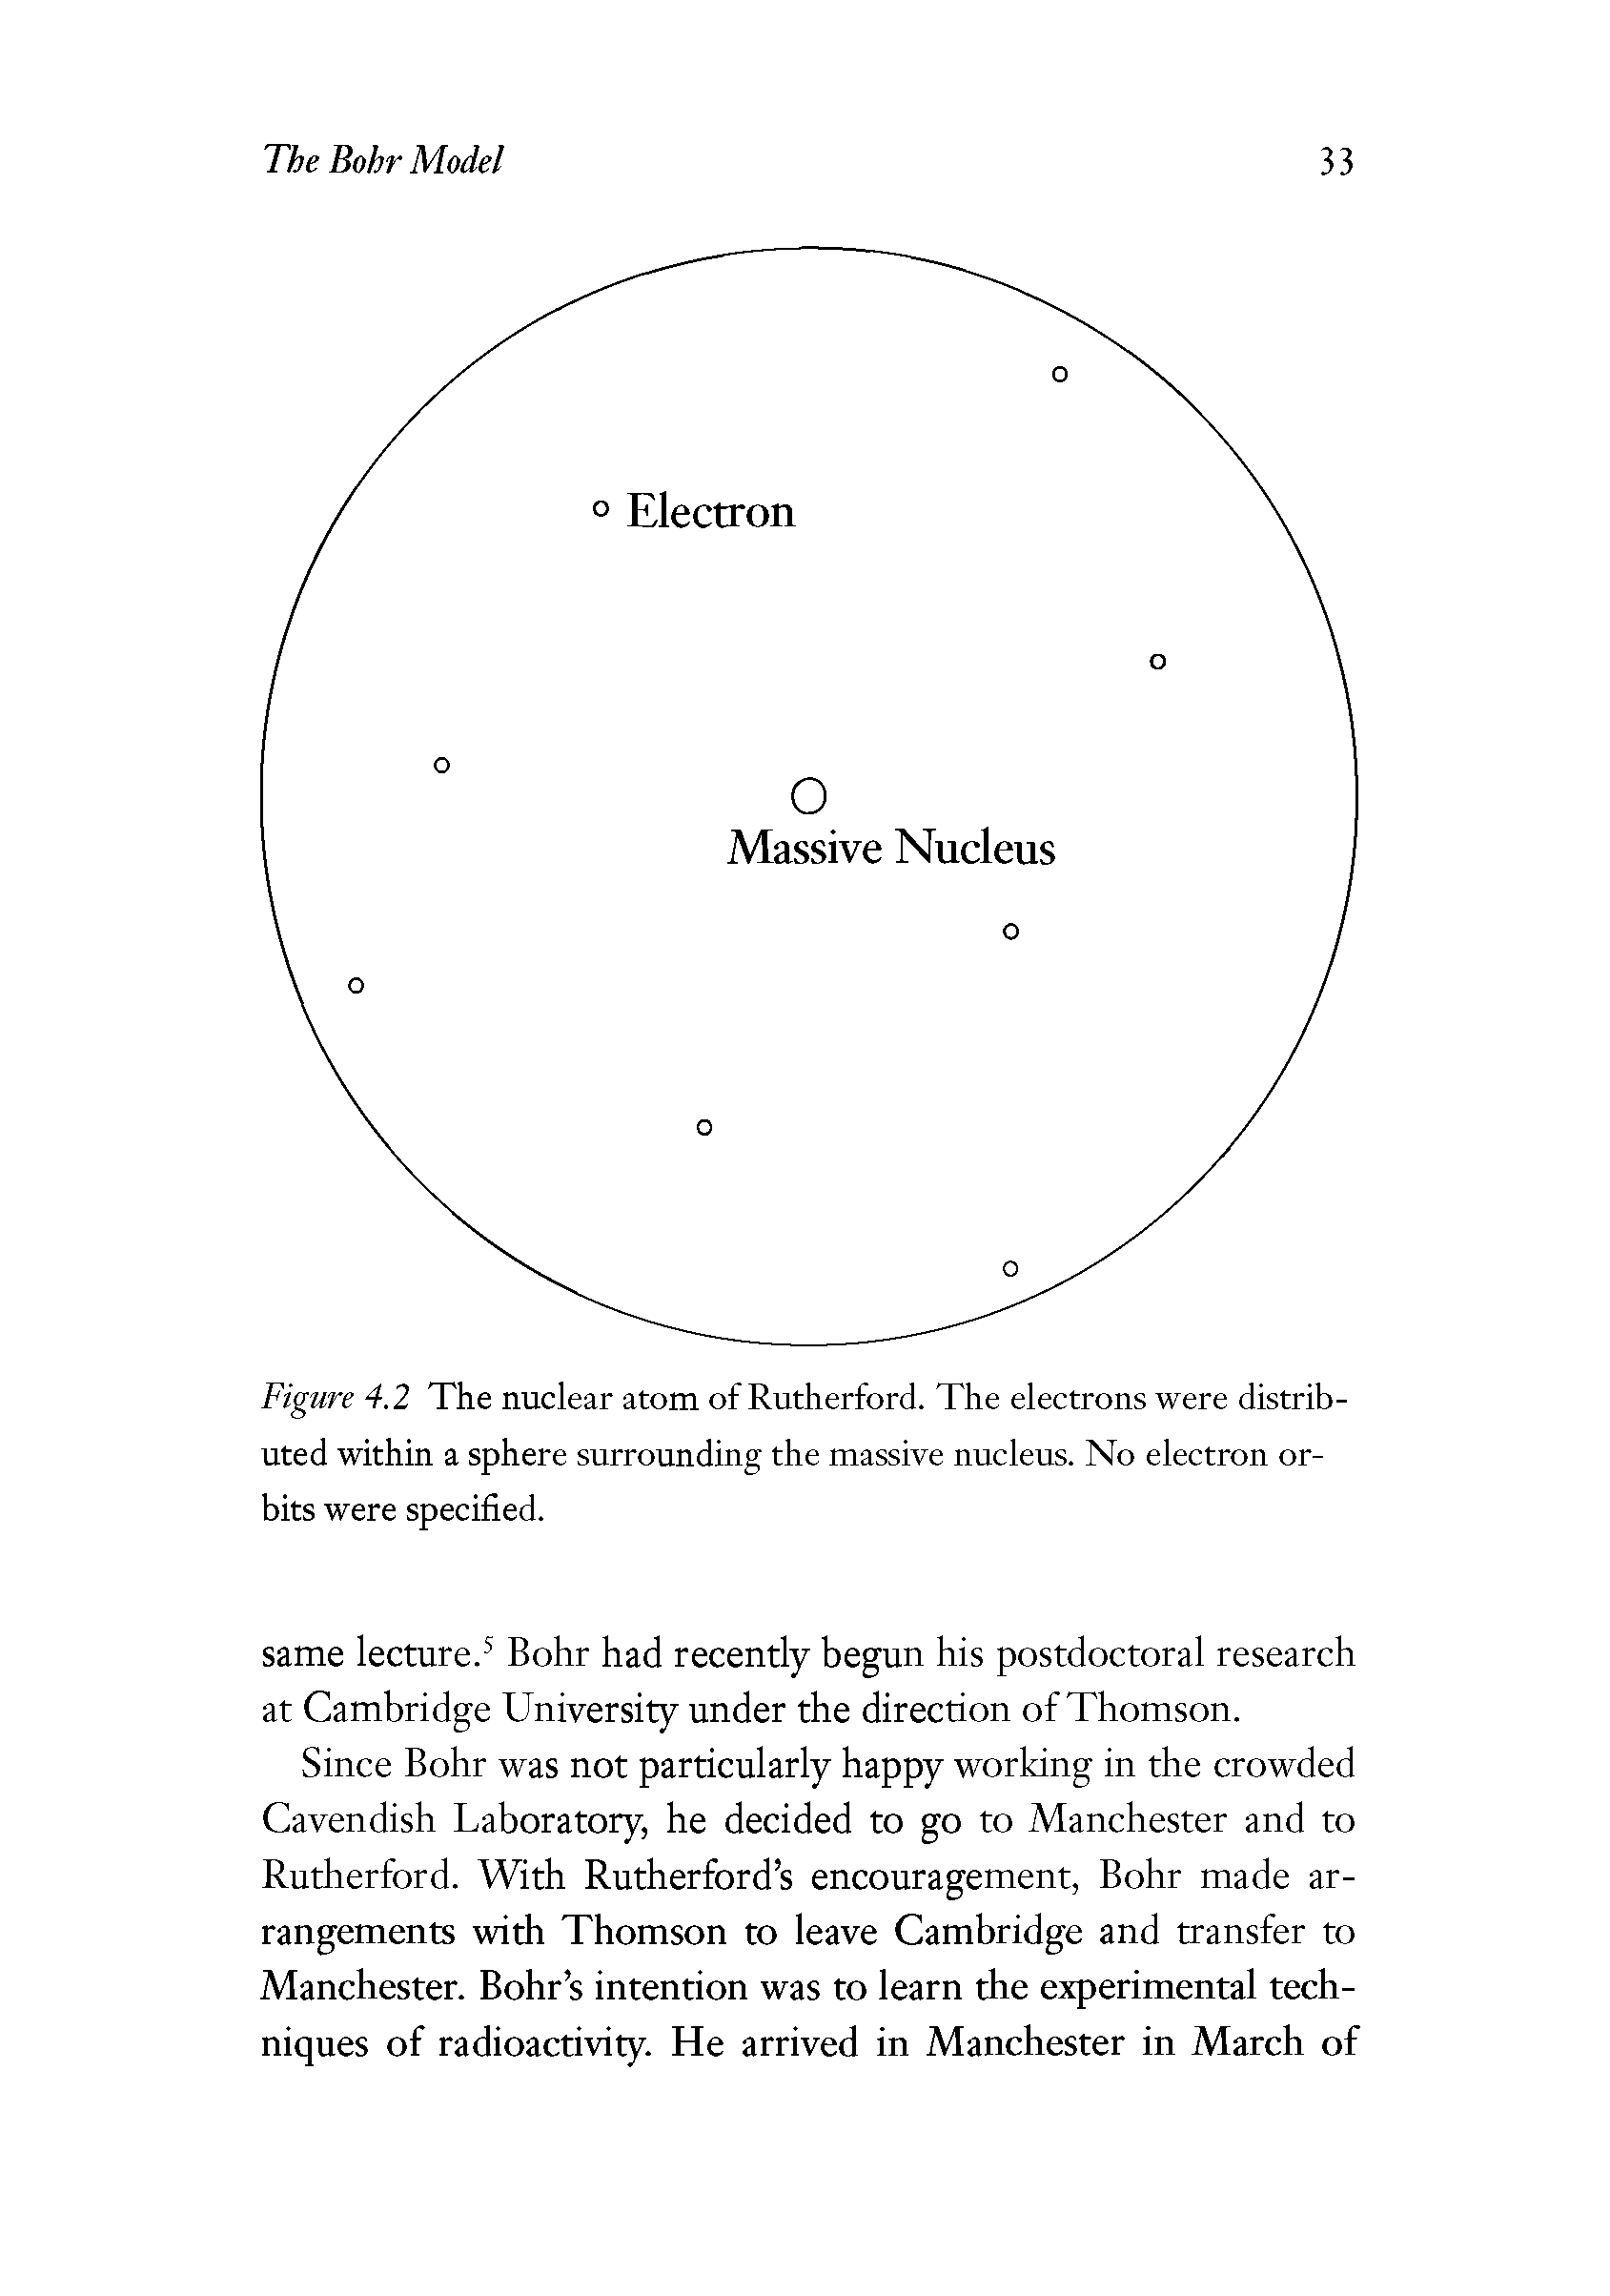 Figure 4.2 The nuclear atom of Rutherford. The electrons were distributed within a sphere surrounding the massive nucleus. No electron orbits were specified.